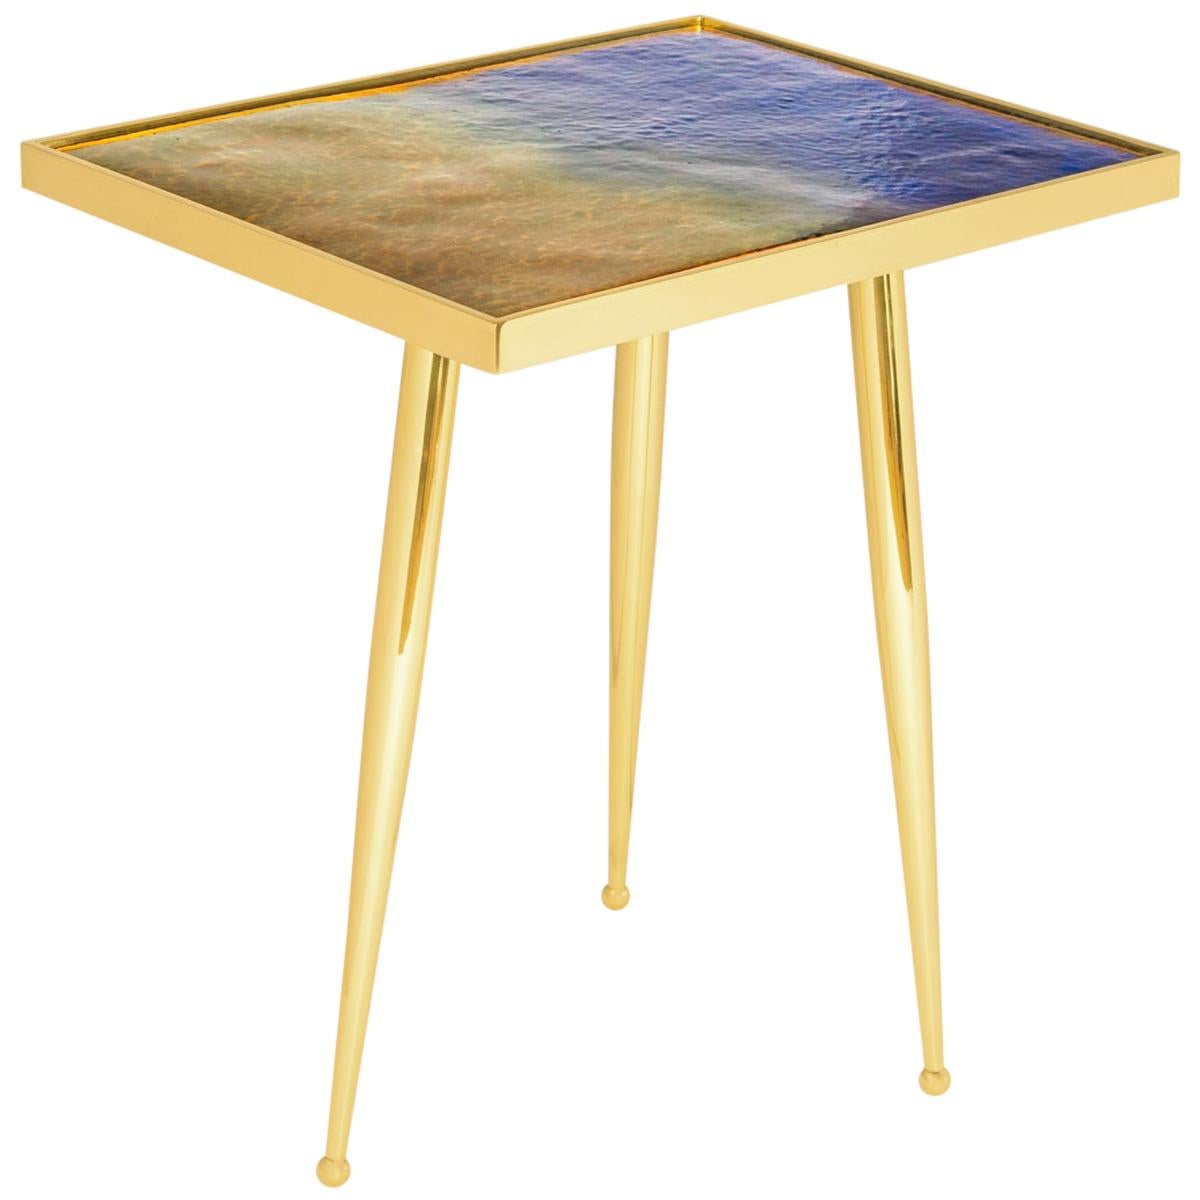 Marea Estate Side Table by form A